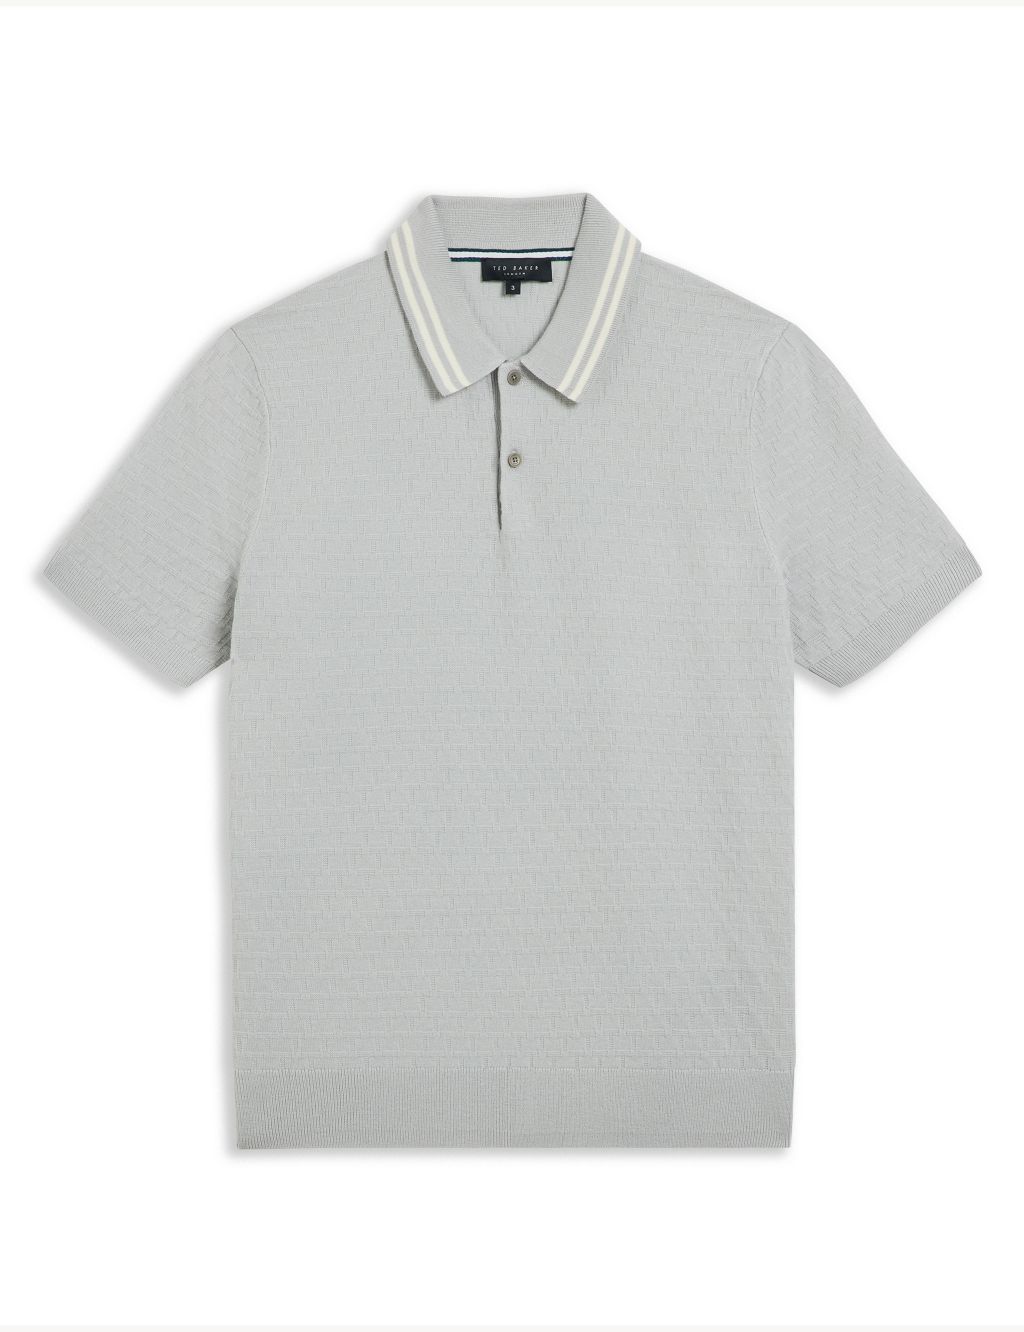 Textured Knitted Polo Shirt with Wool image 2